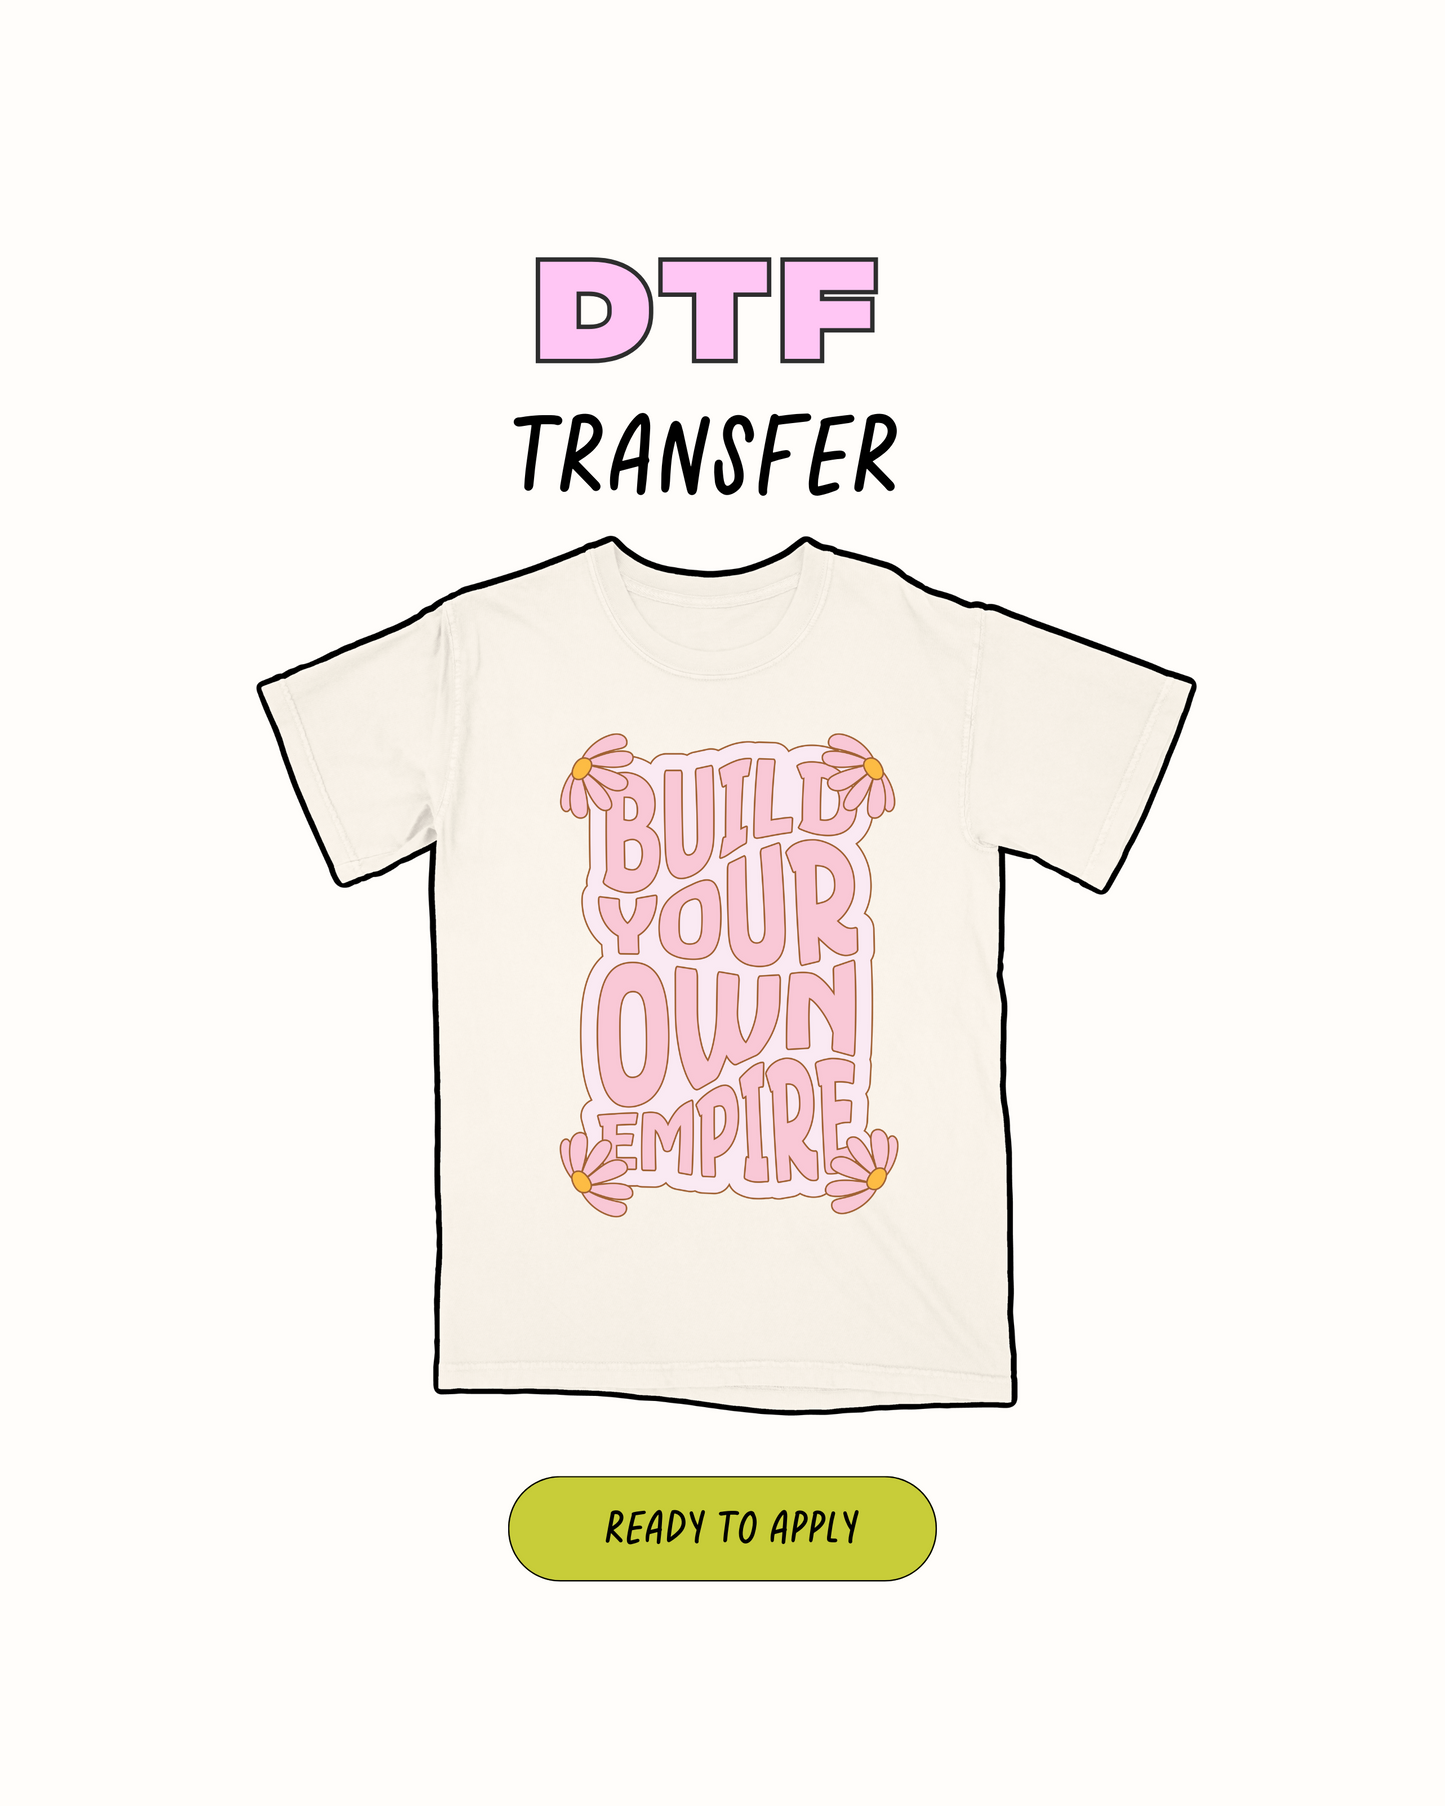 Build Your empire - DTF Transfer